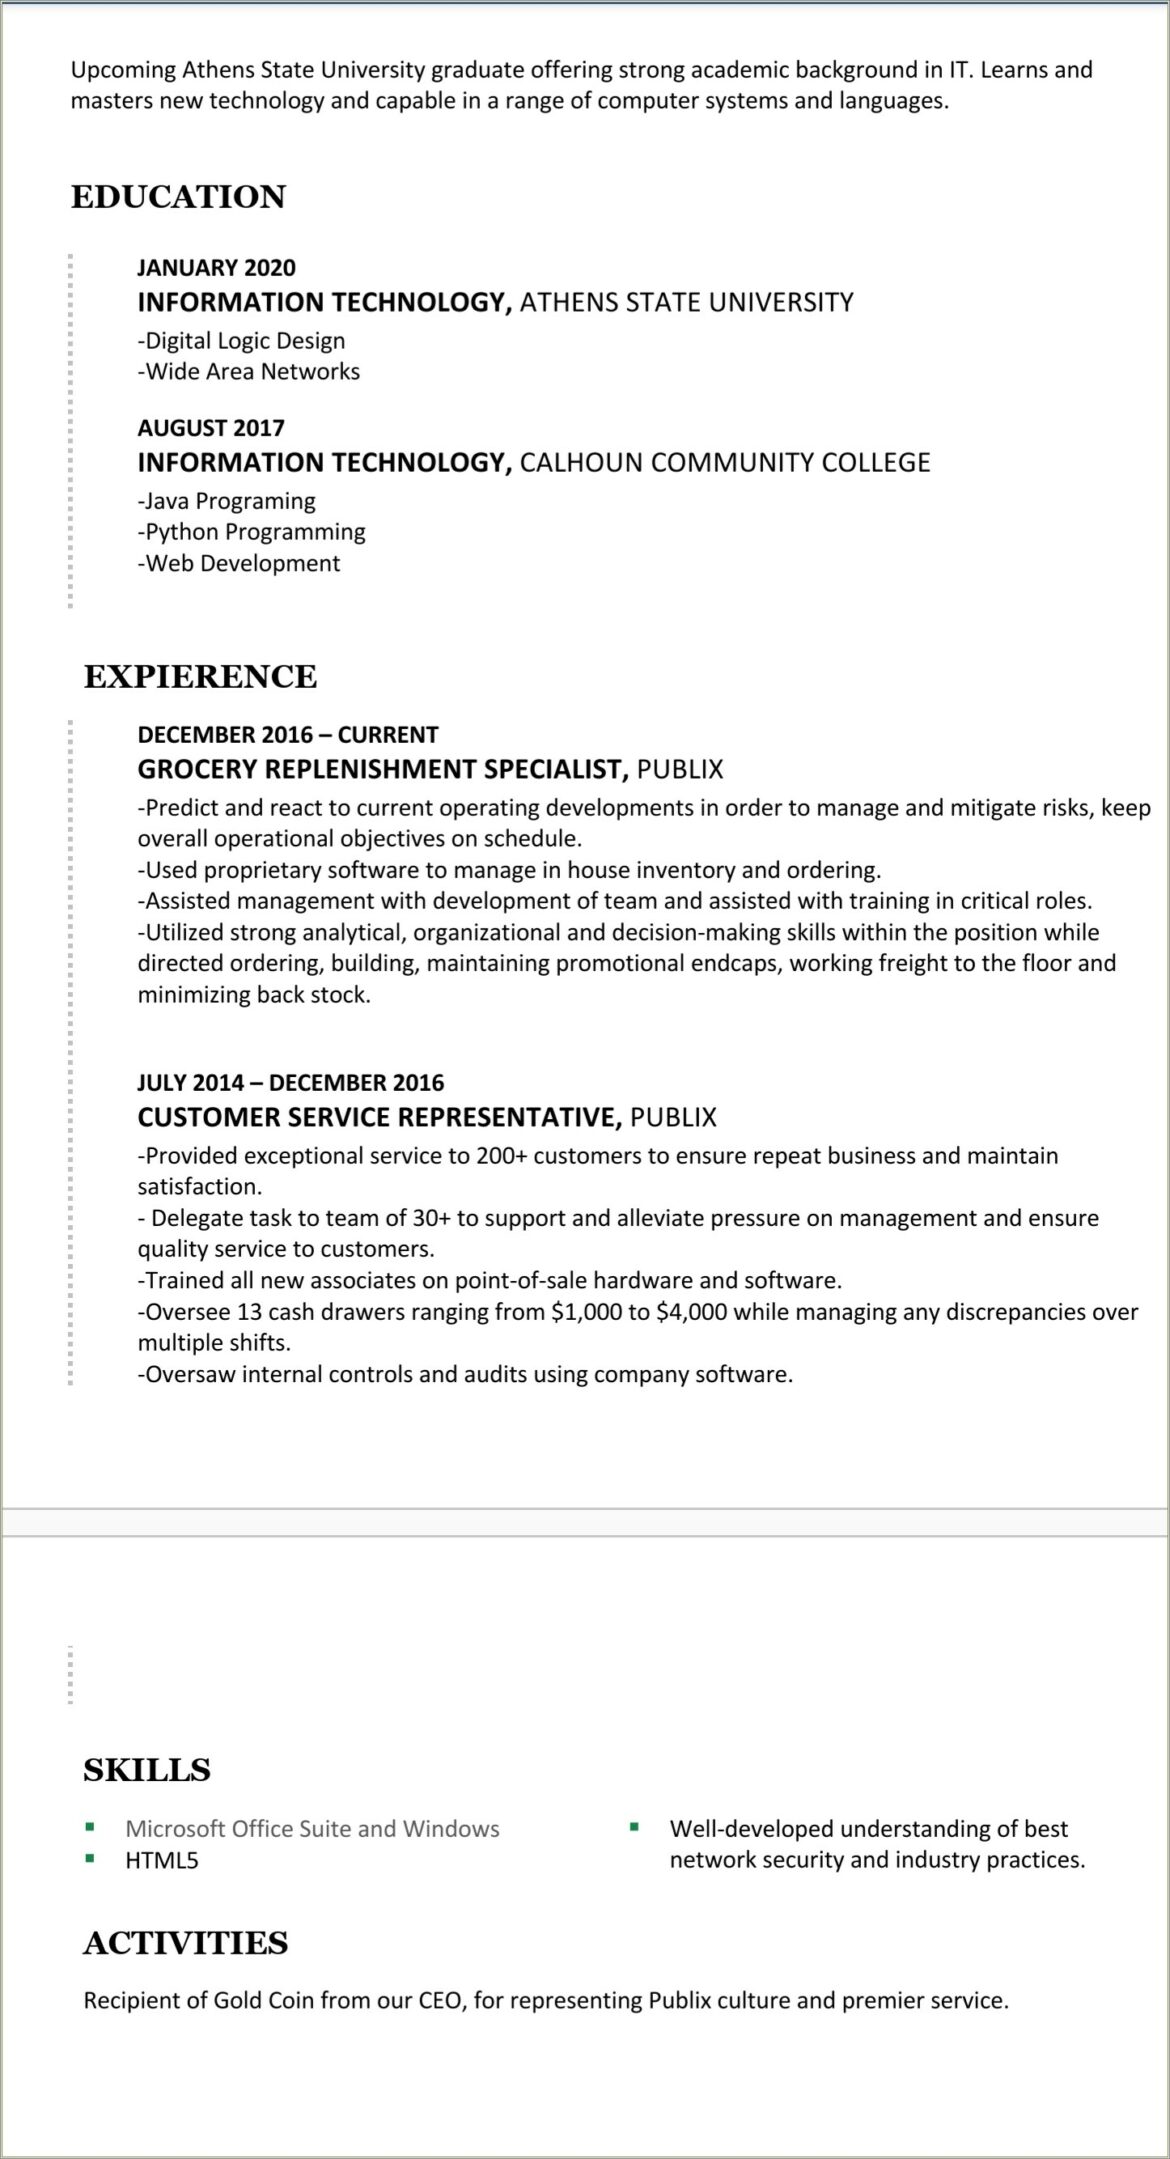 Sample Resume With Comp Tia Credentials